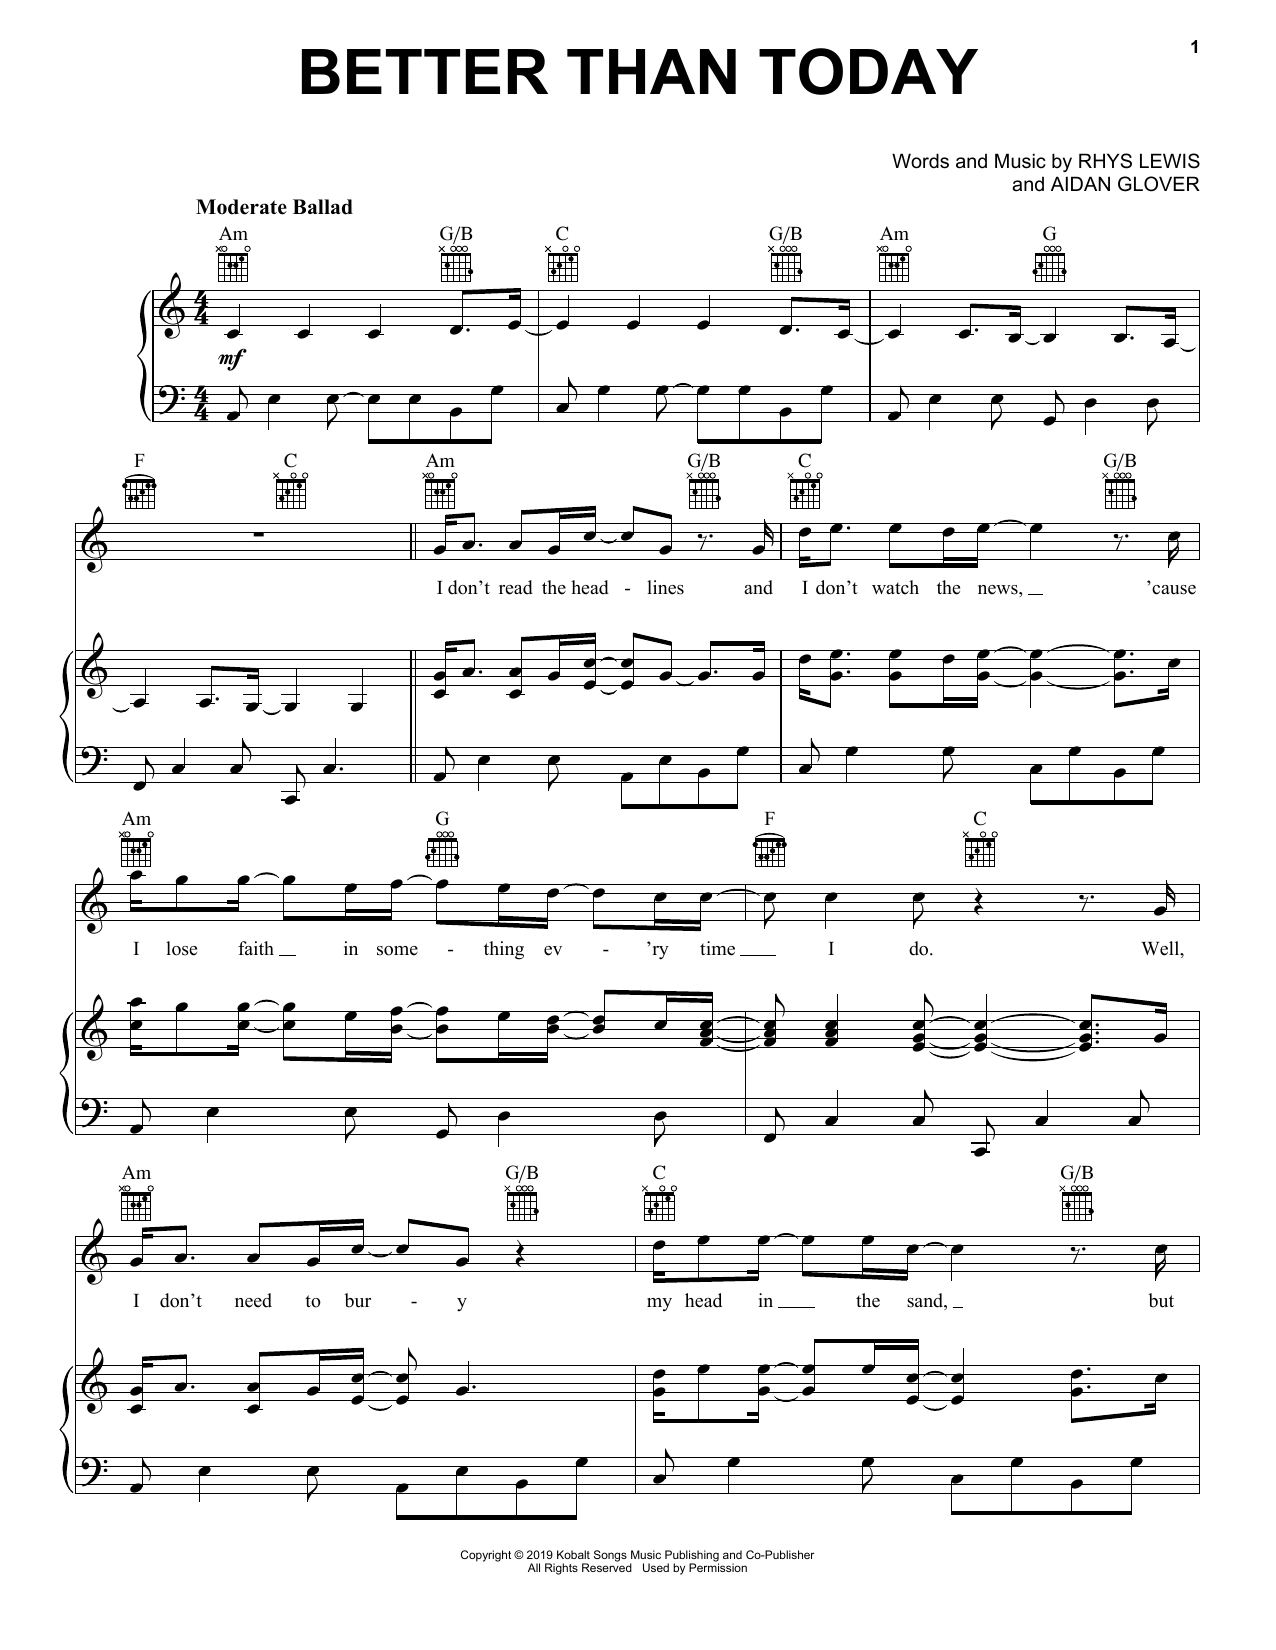 Download Rhys Lewis Better Than Today Sheet Music